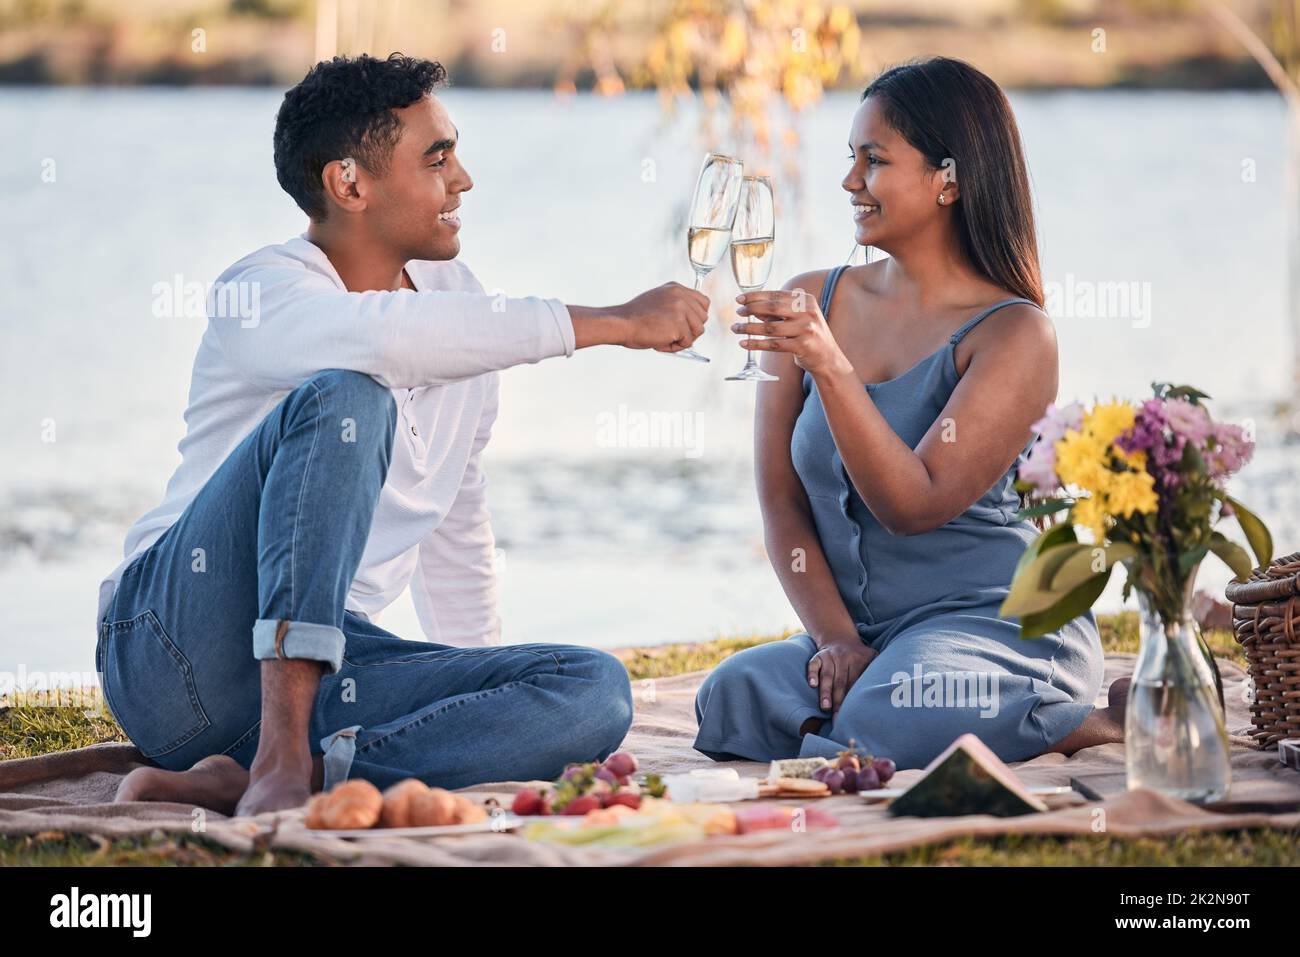 Heres to over everlasting love. Shot of a young couple making a toast while on a picnic at a lakeside. Stock Photo